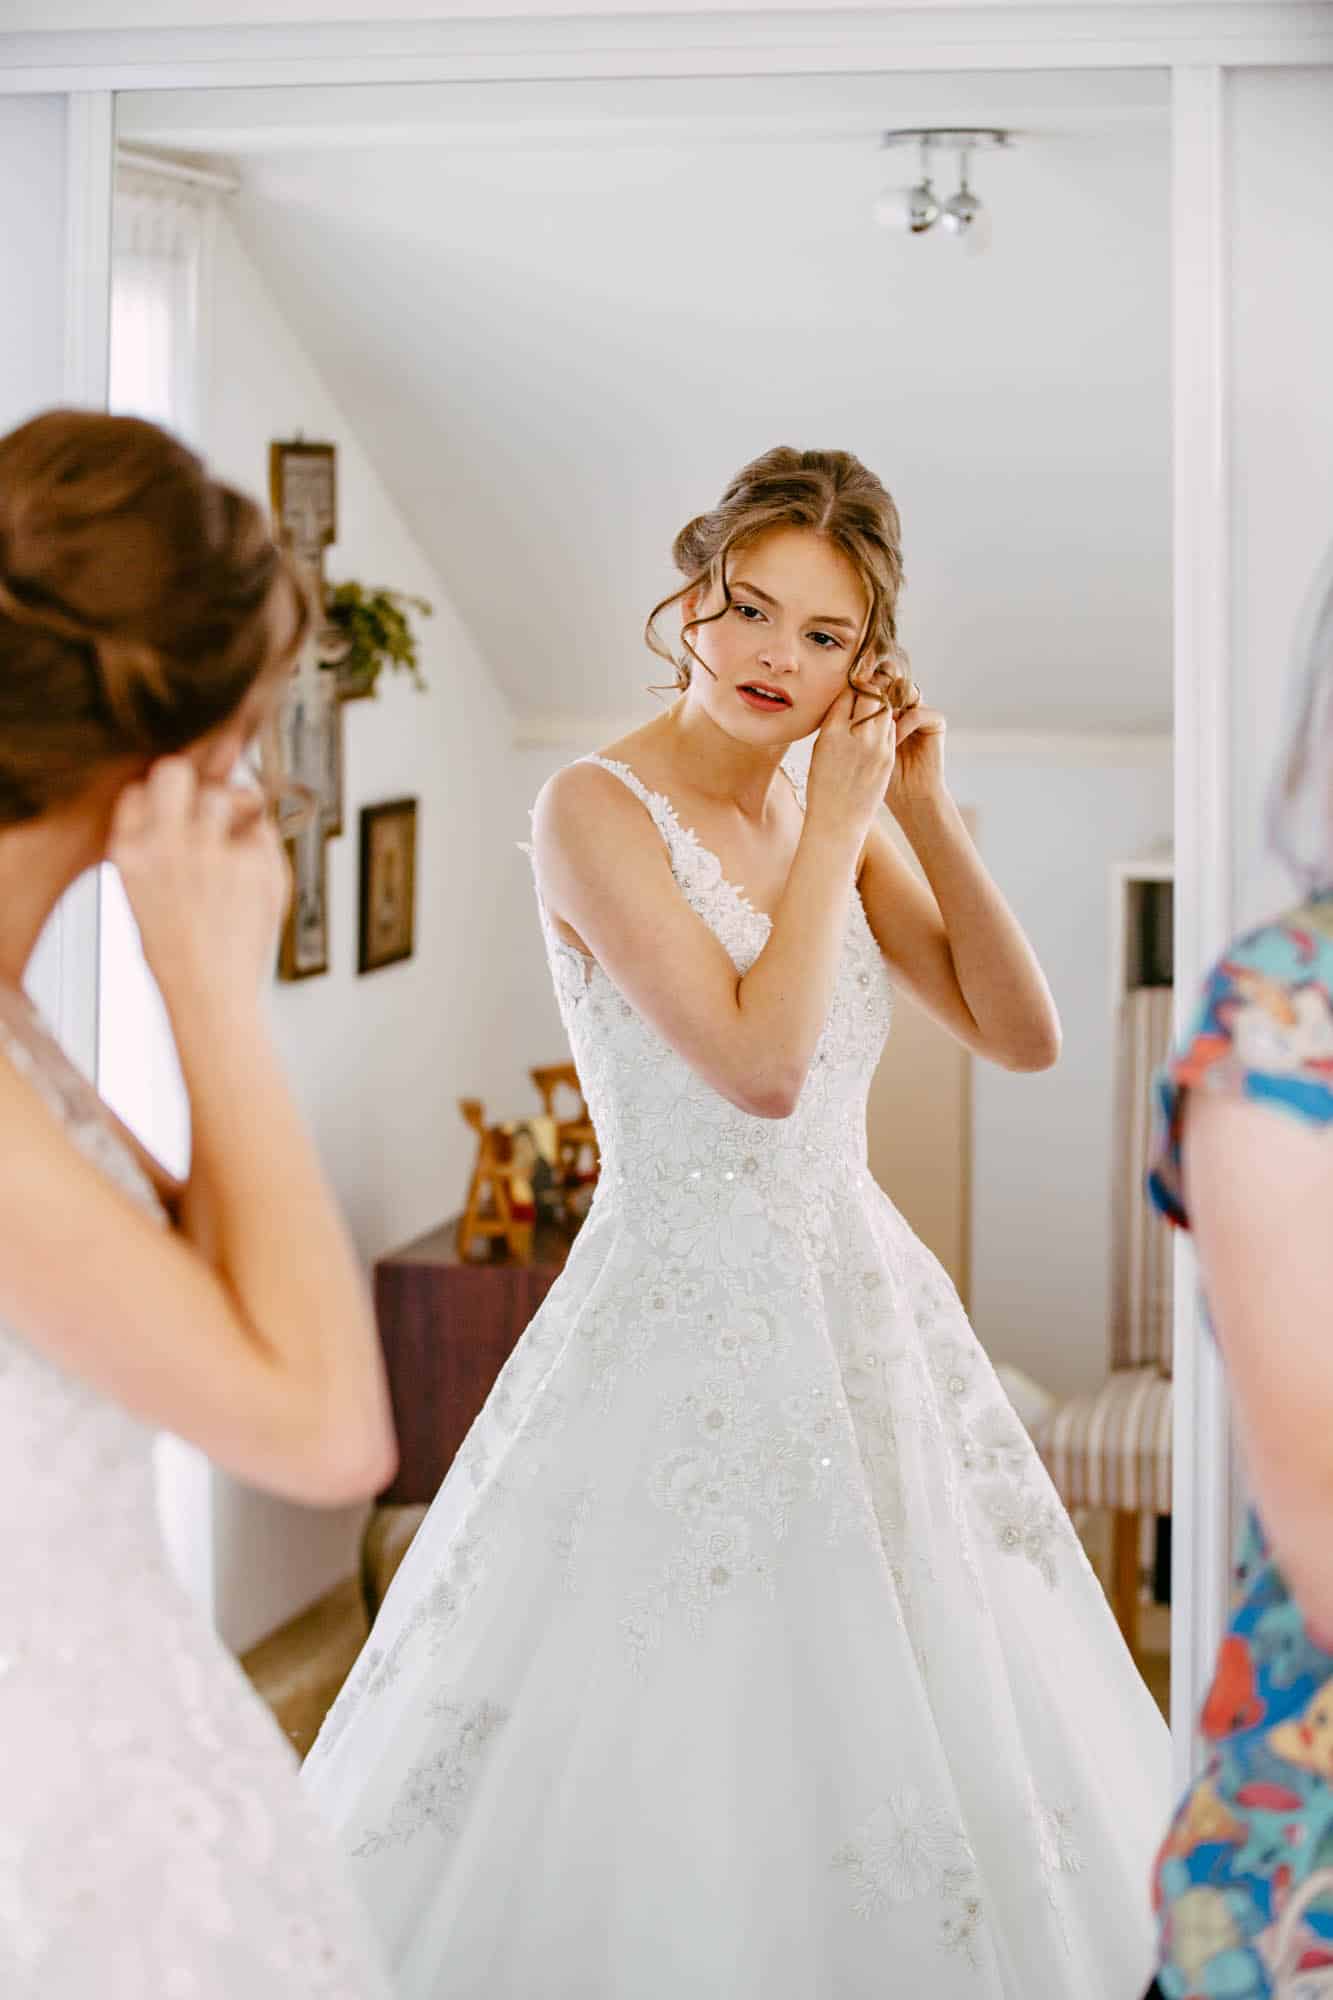 A bride puts on her A-line wedding dress in front of a mirror.